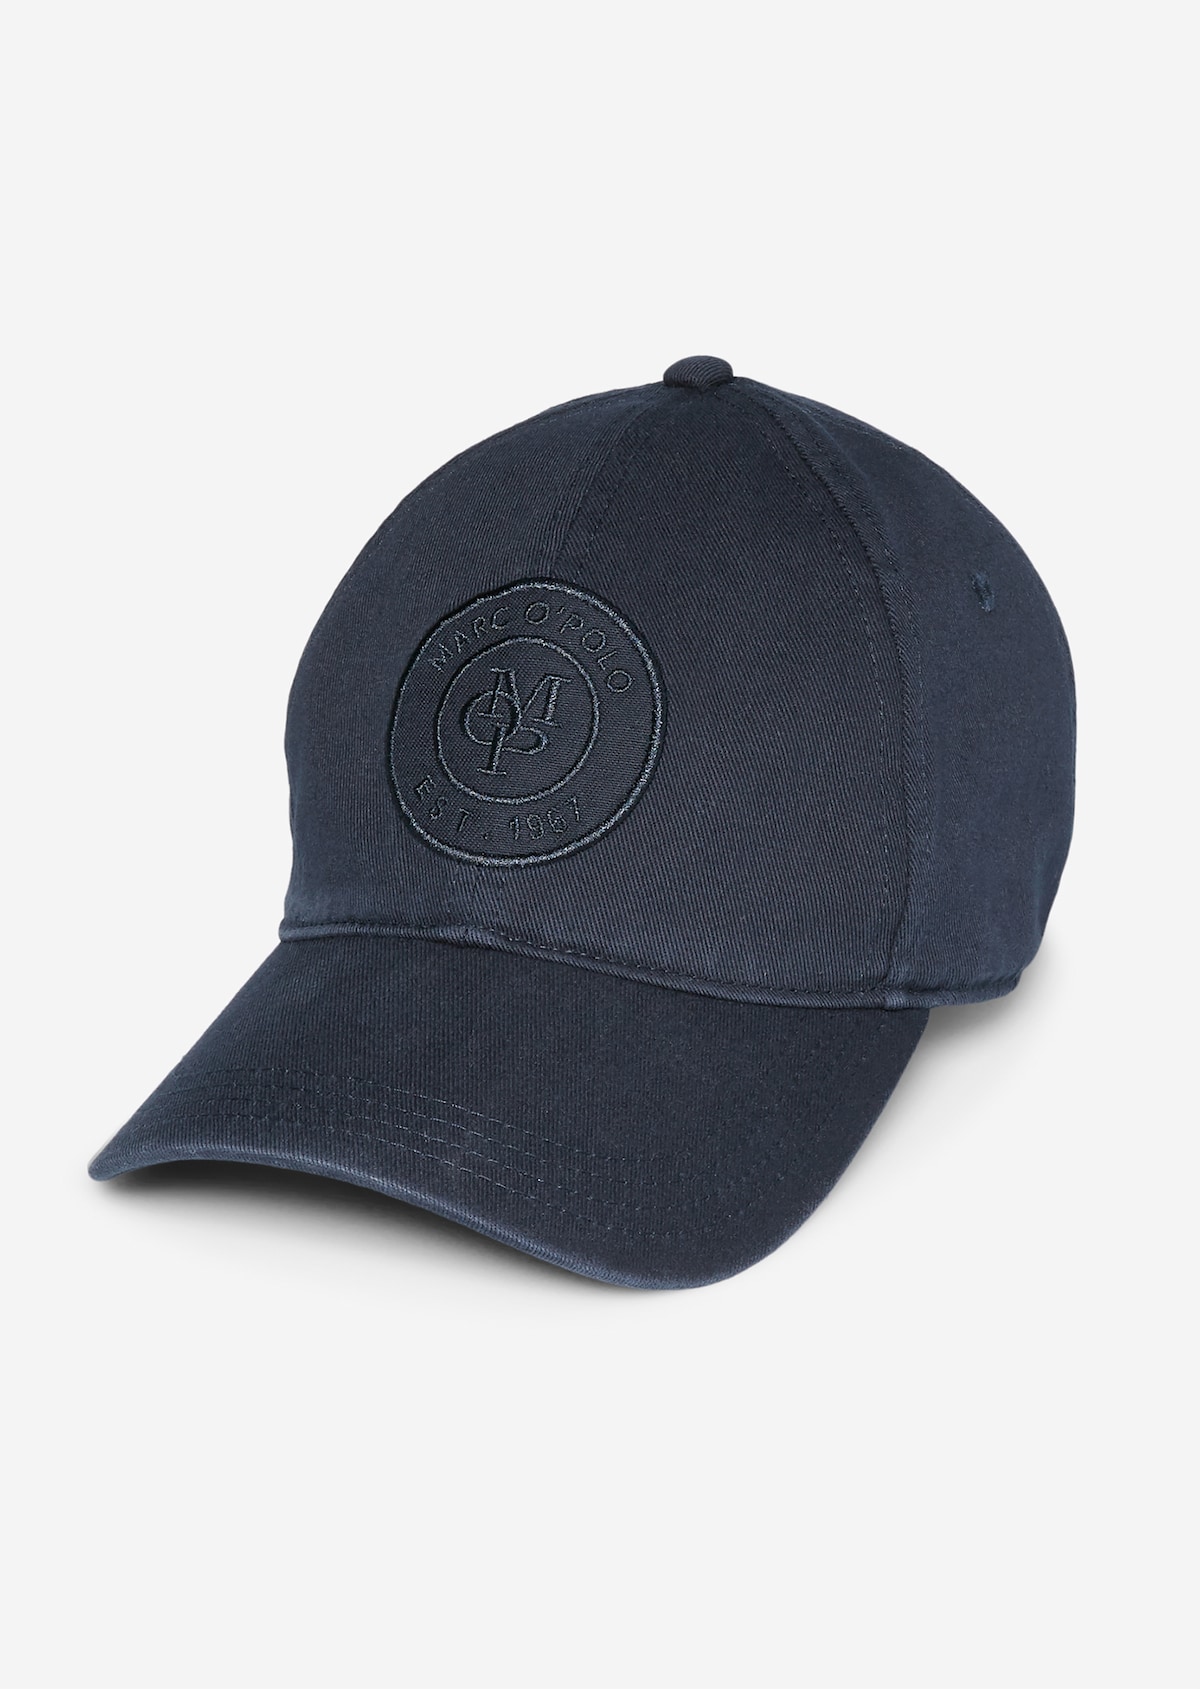 Cap with an embroidered logo - blue | Caps | MARC O’POLO